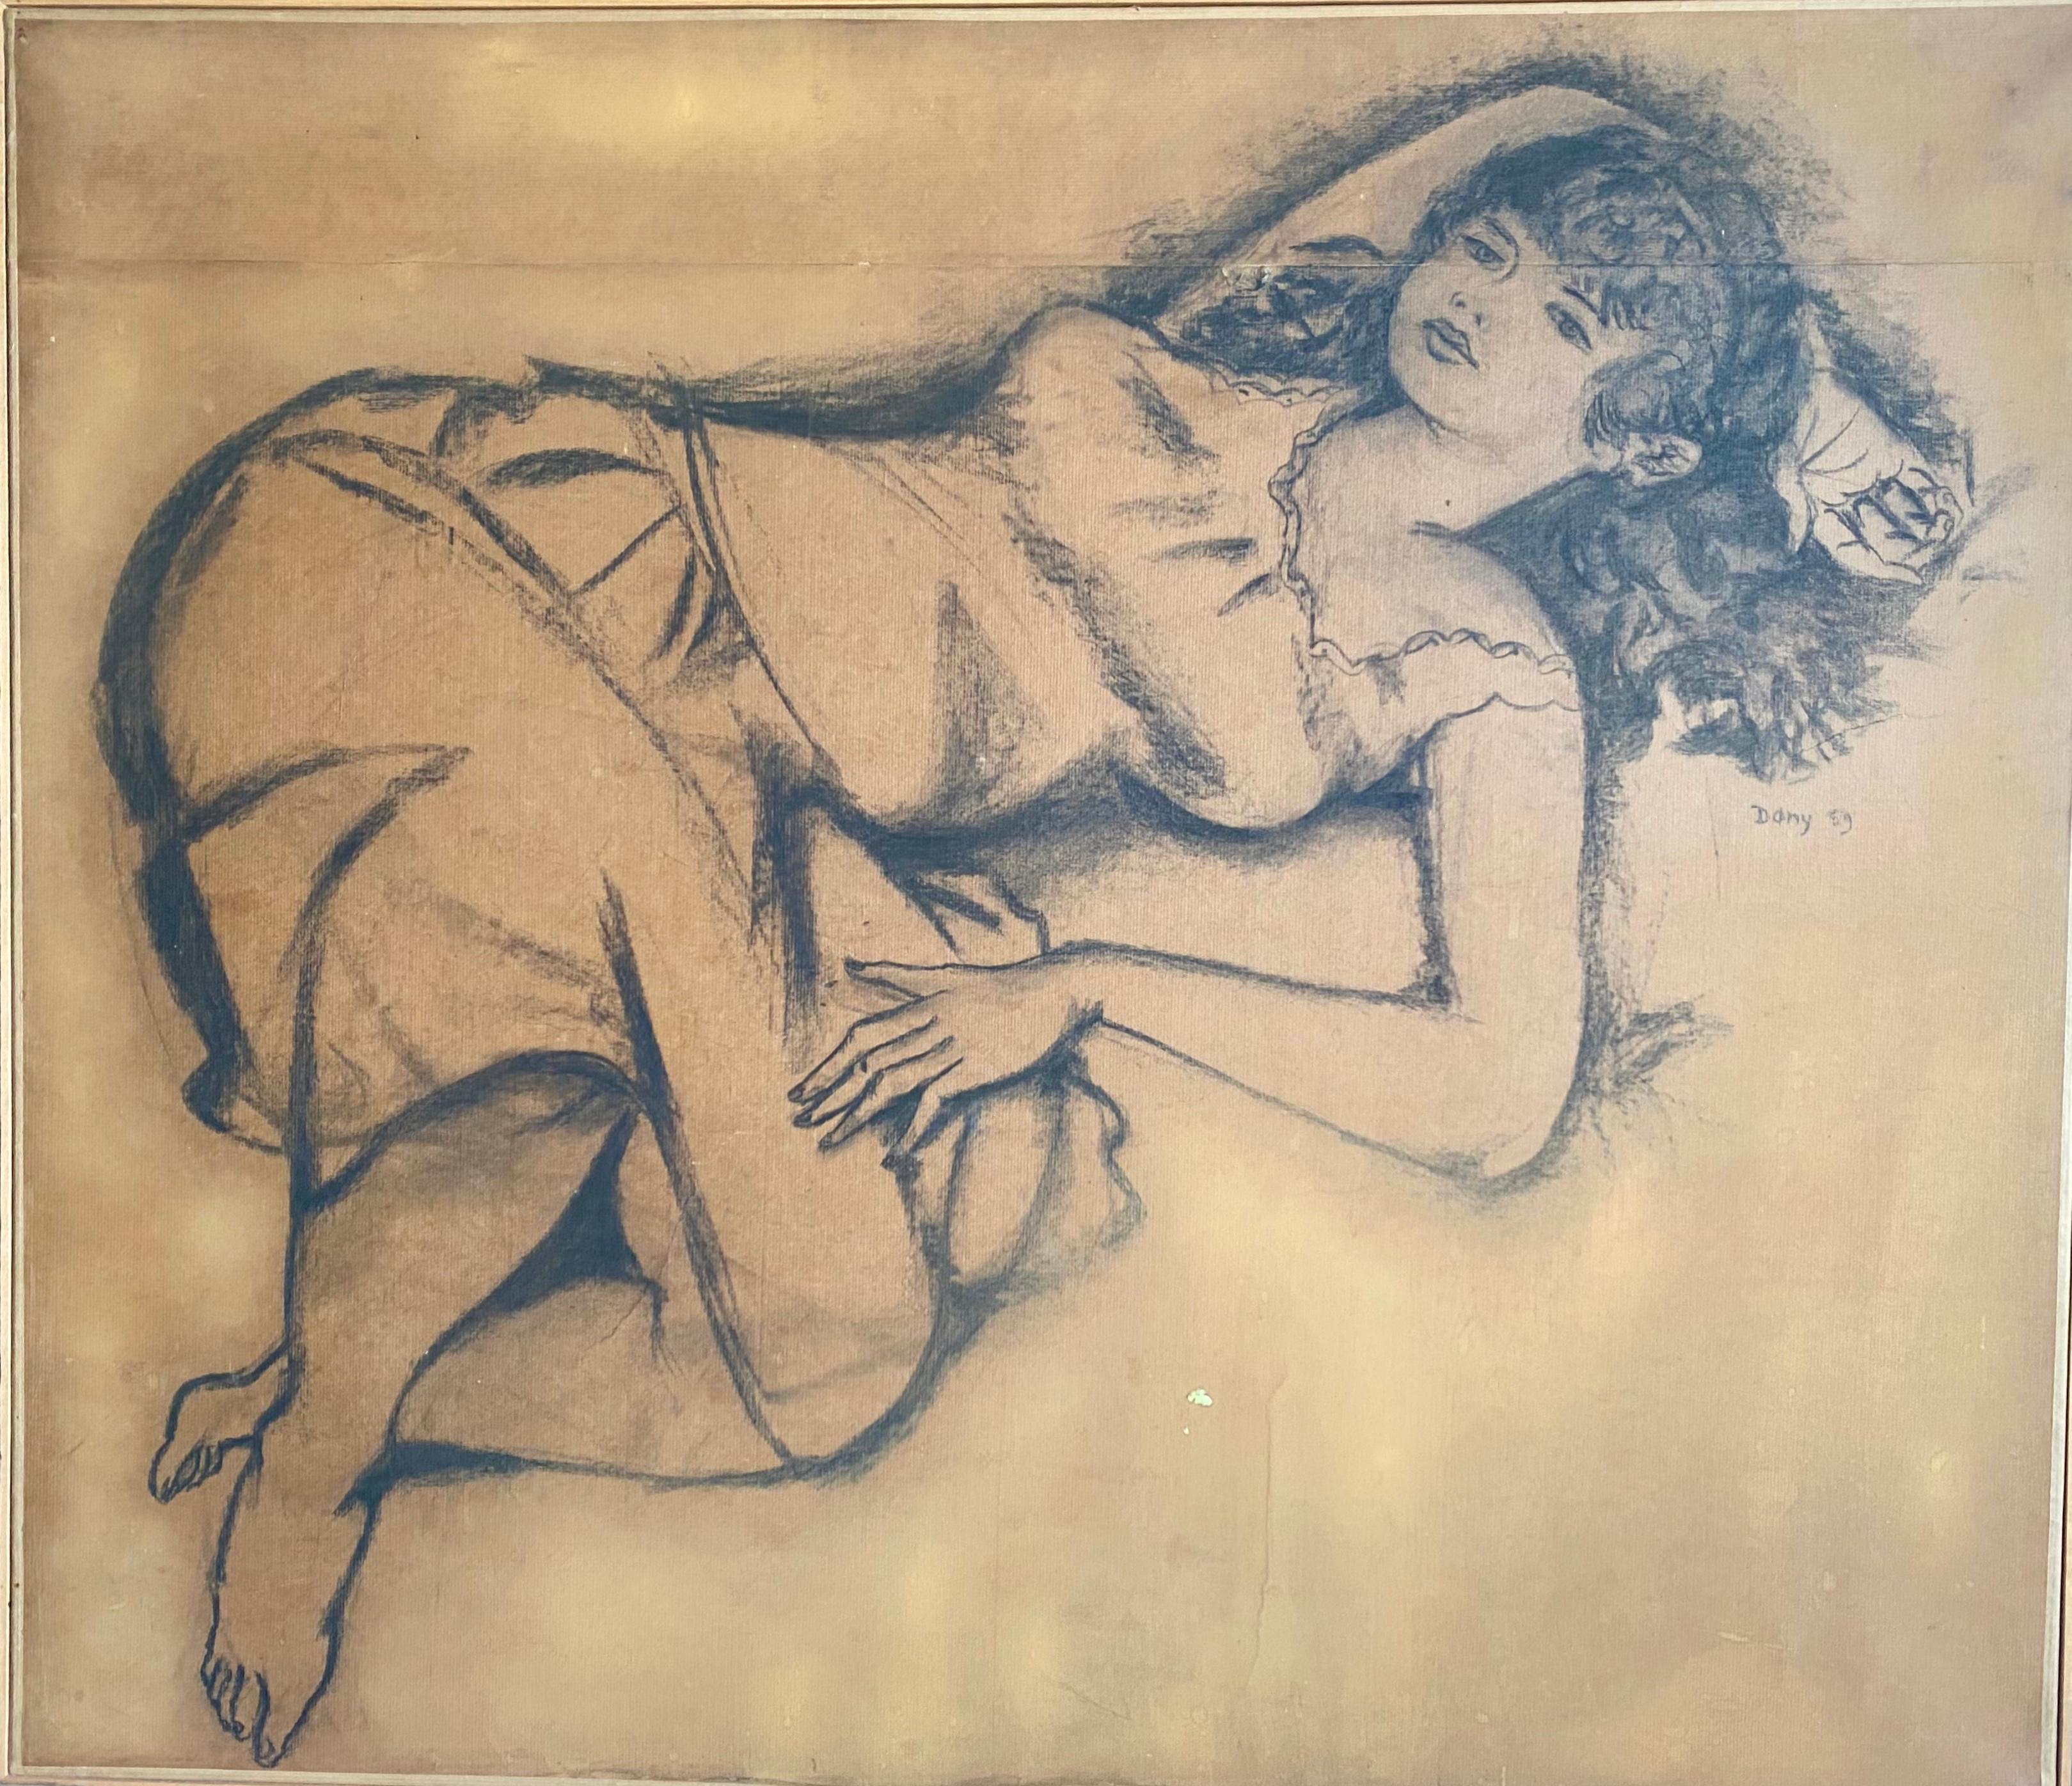 Dany Lartigue Figurative Art - Summer Siesta 1959 New Wave period large drawing relaxed young woman daydreaming